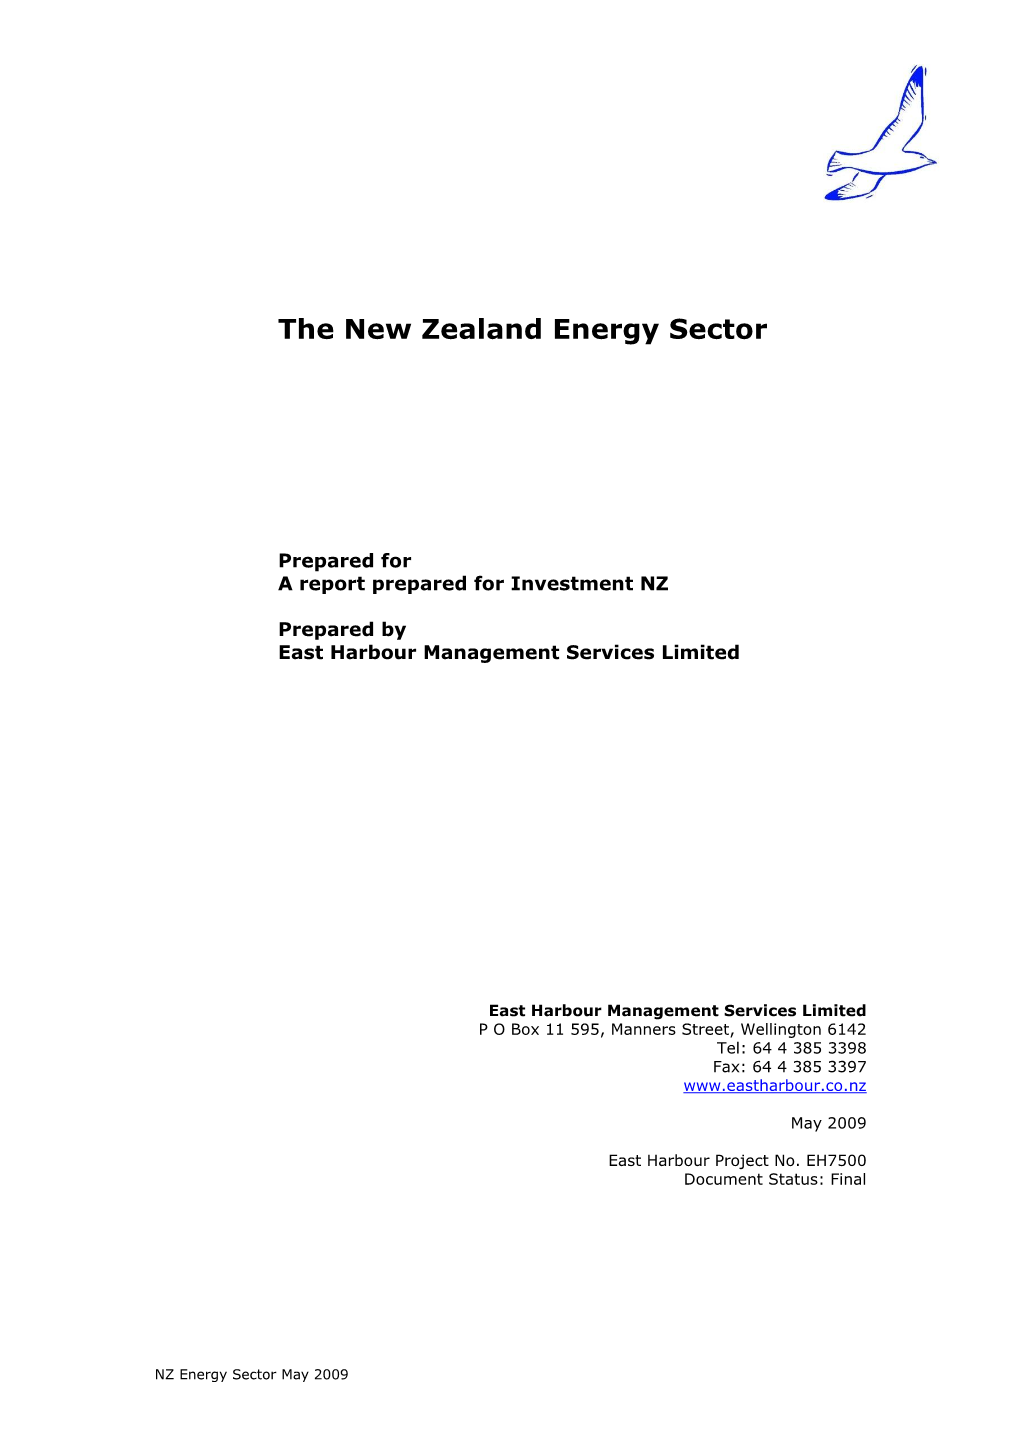 "The New Zealand Energy Sector", Report Prepared for Investment NZ, May 2009